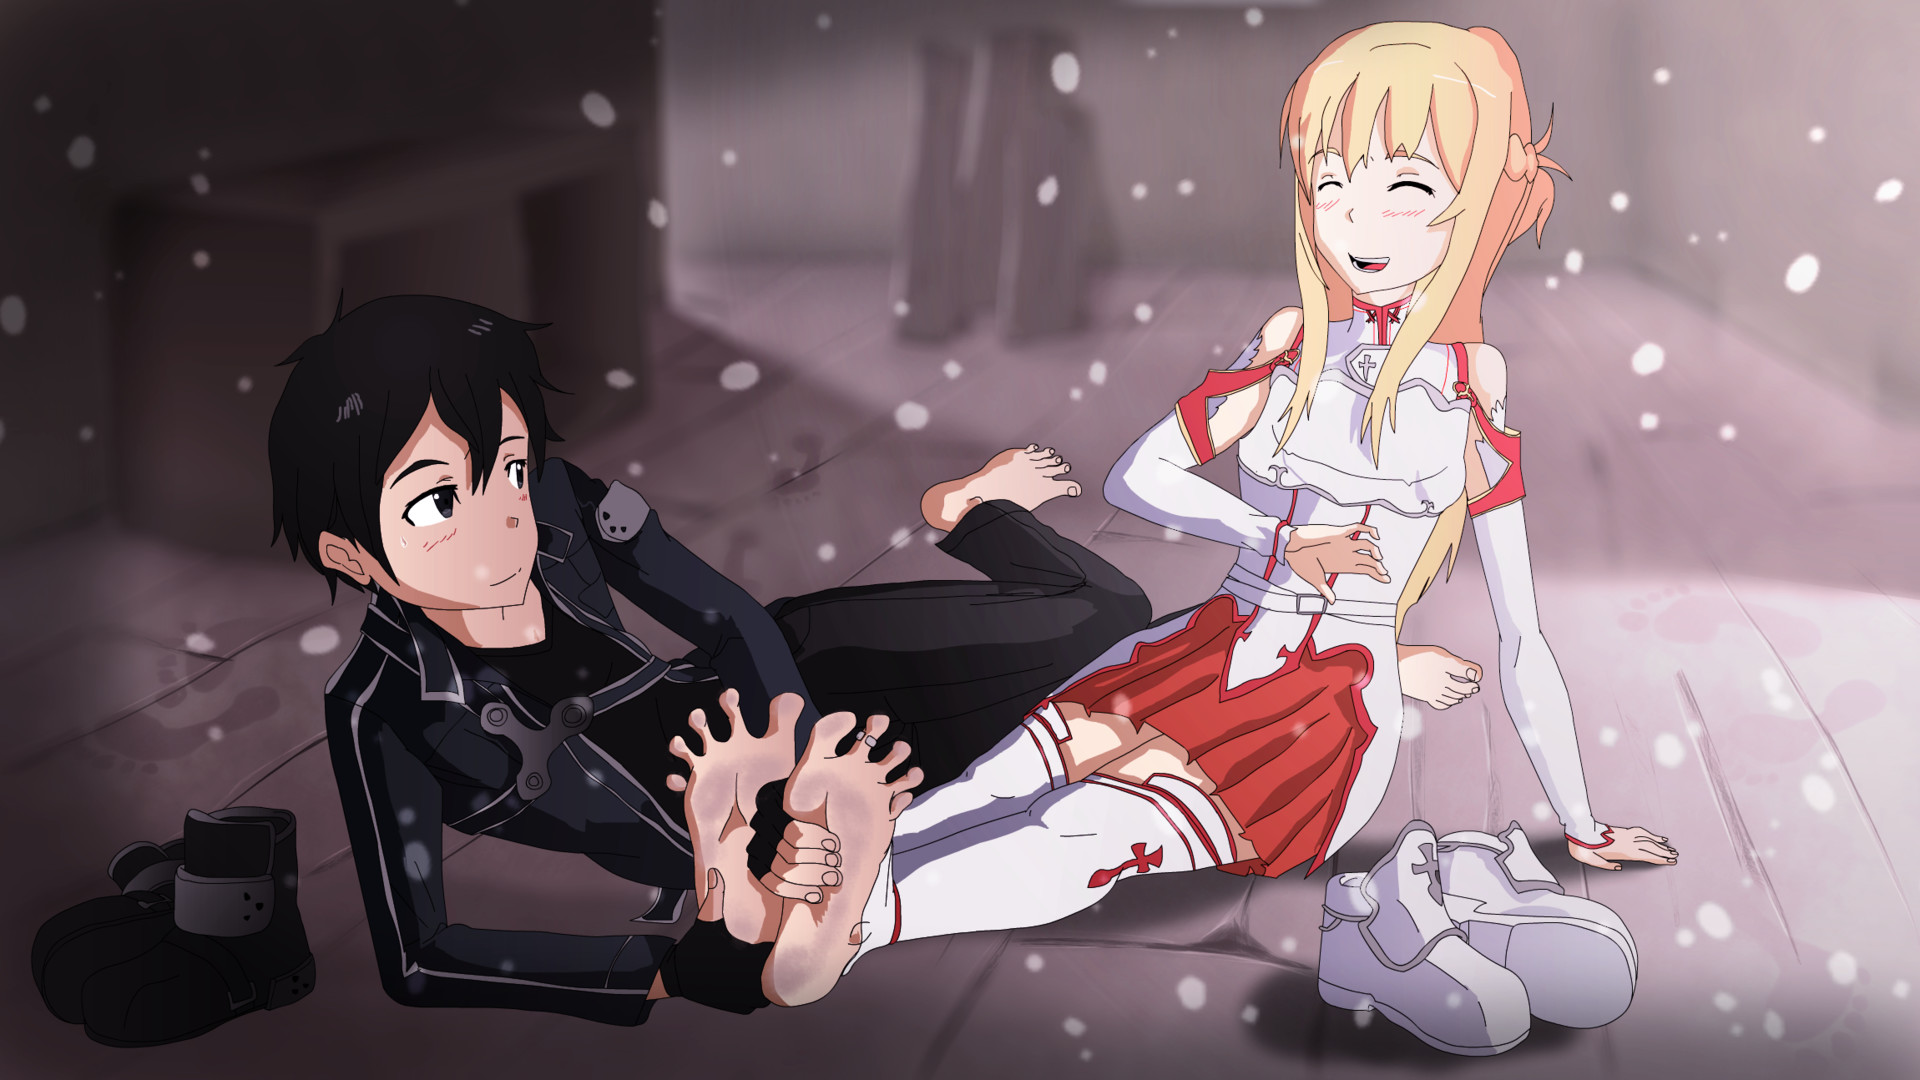 so i mad this picture for the most lovely character i like in SAO and i rea...